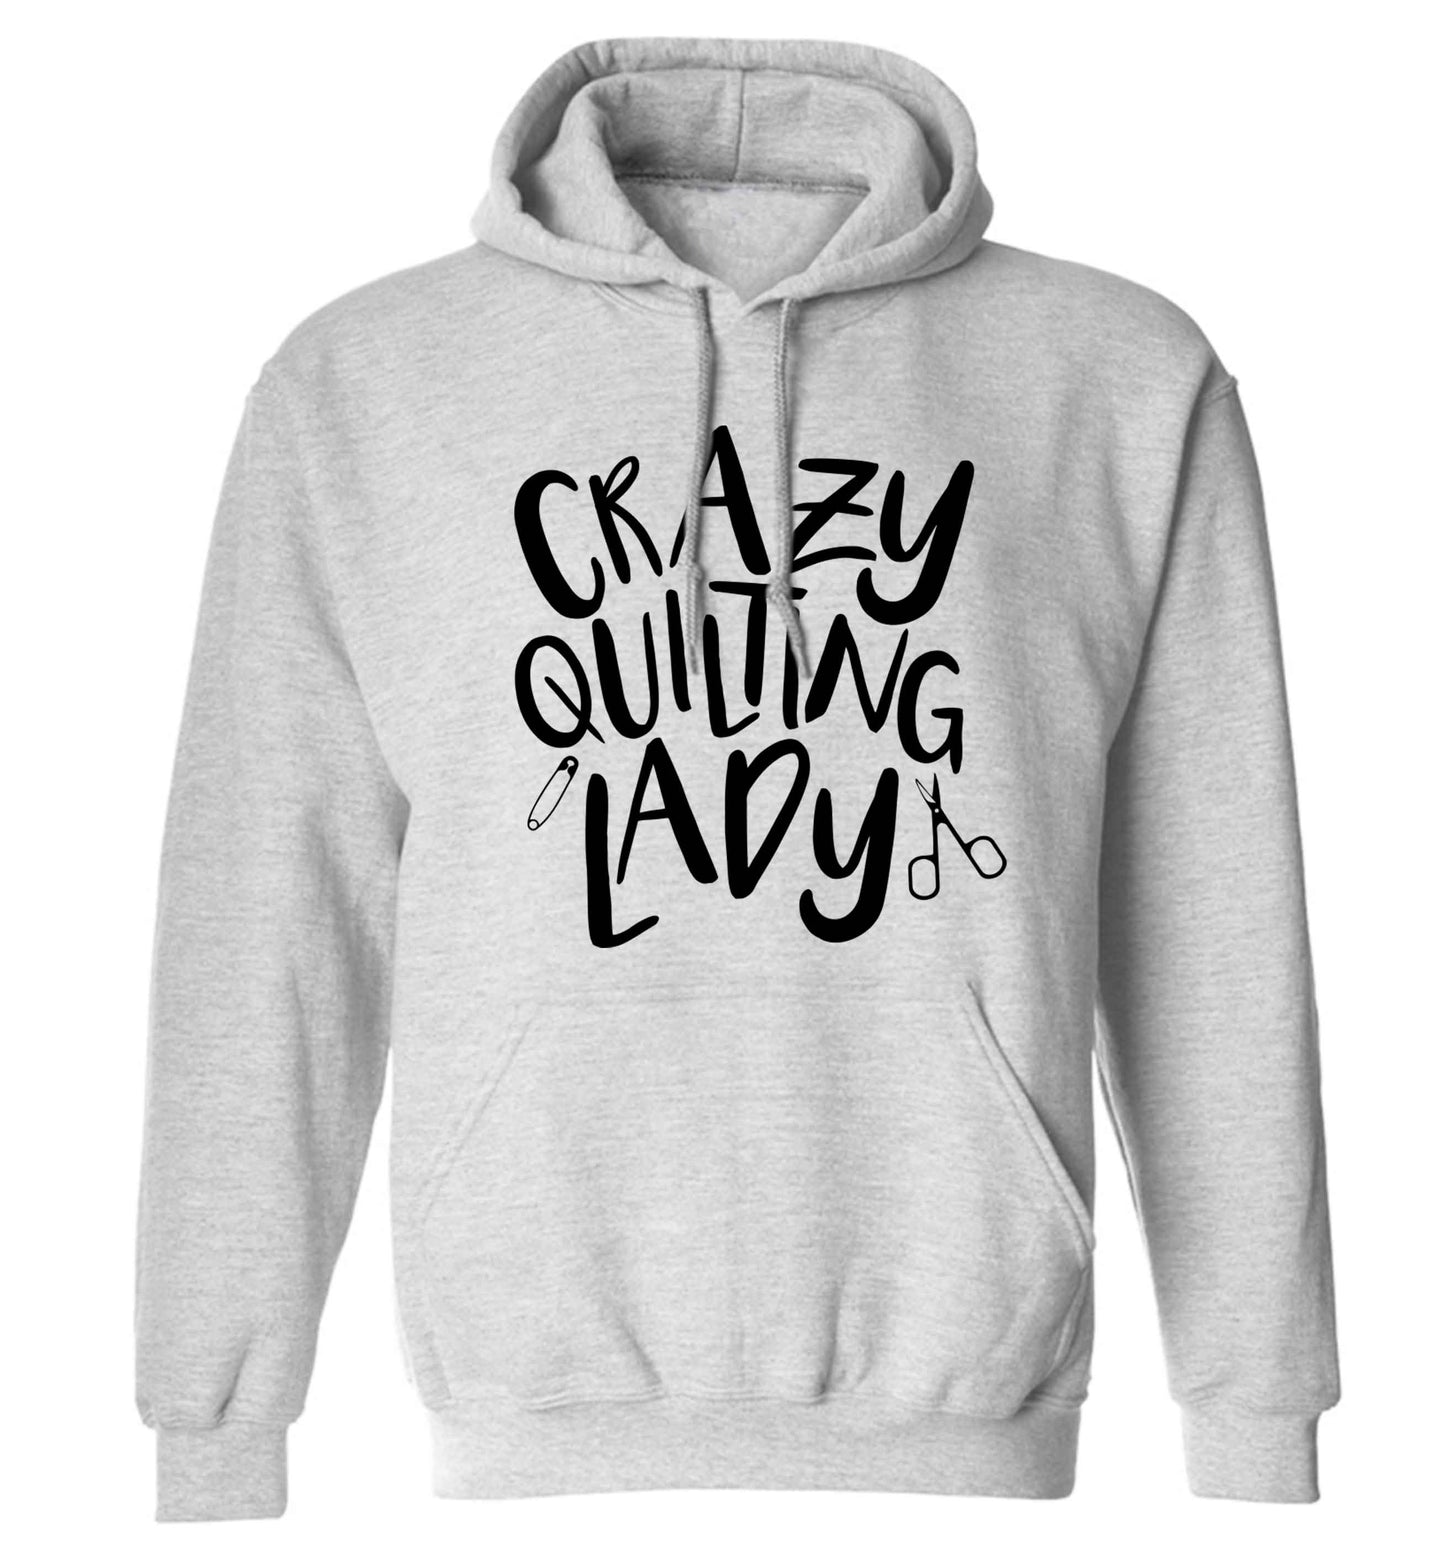 Crazy quilting lady adults unisex grey hoodie 2XL